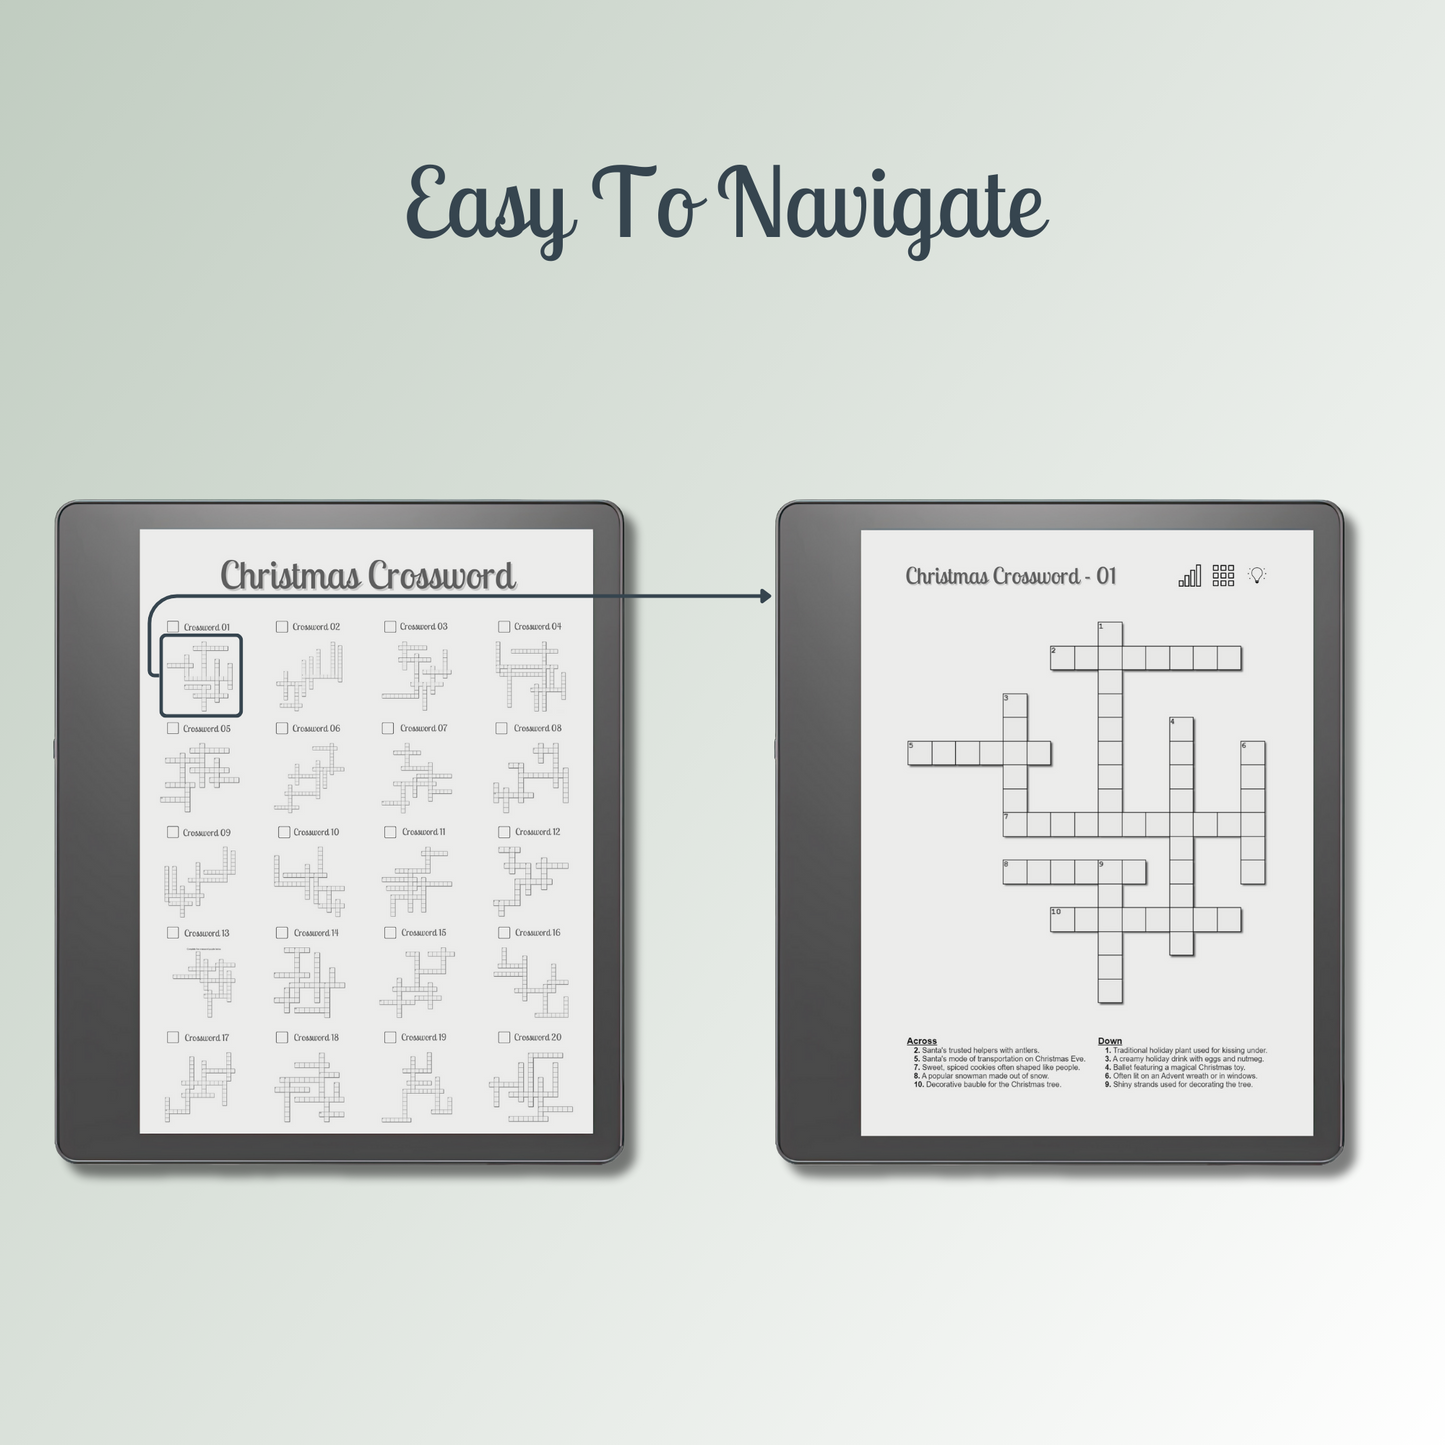 Kindle Scribe Christmas Crossword with easy navigations.